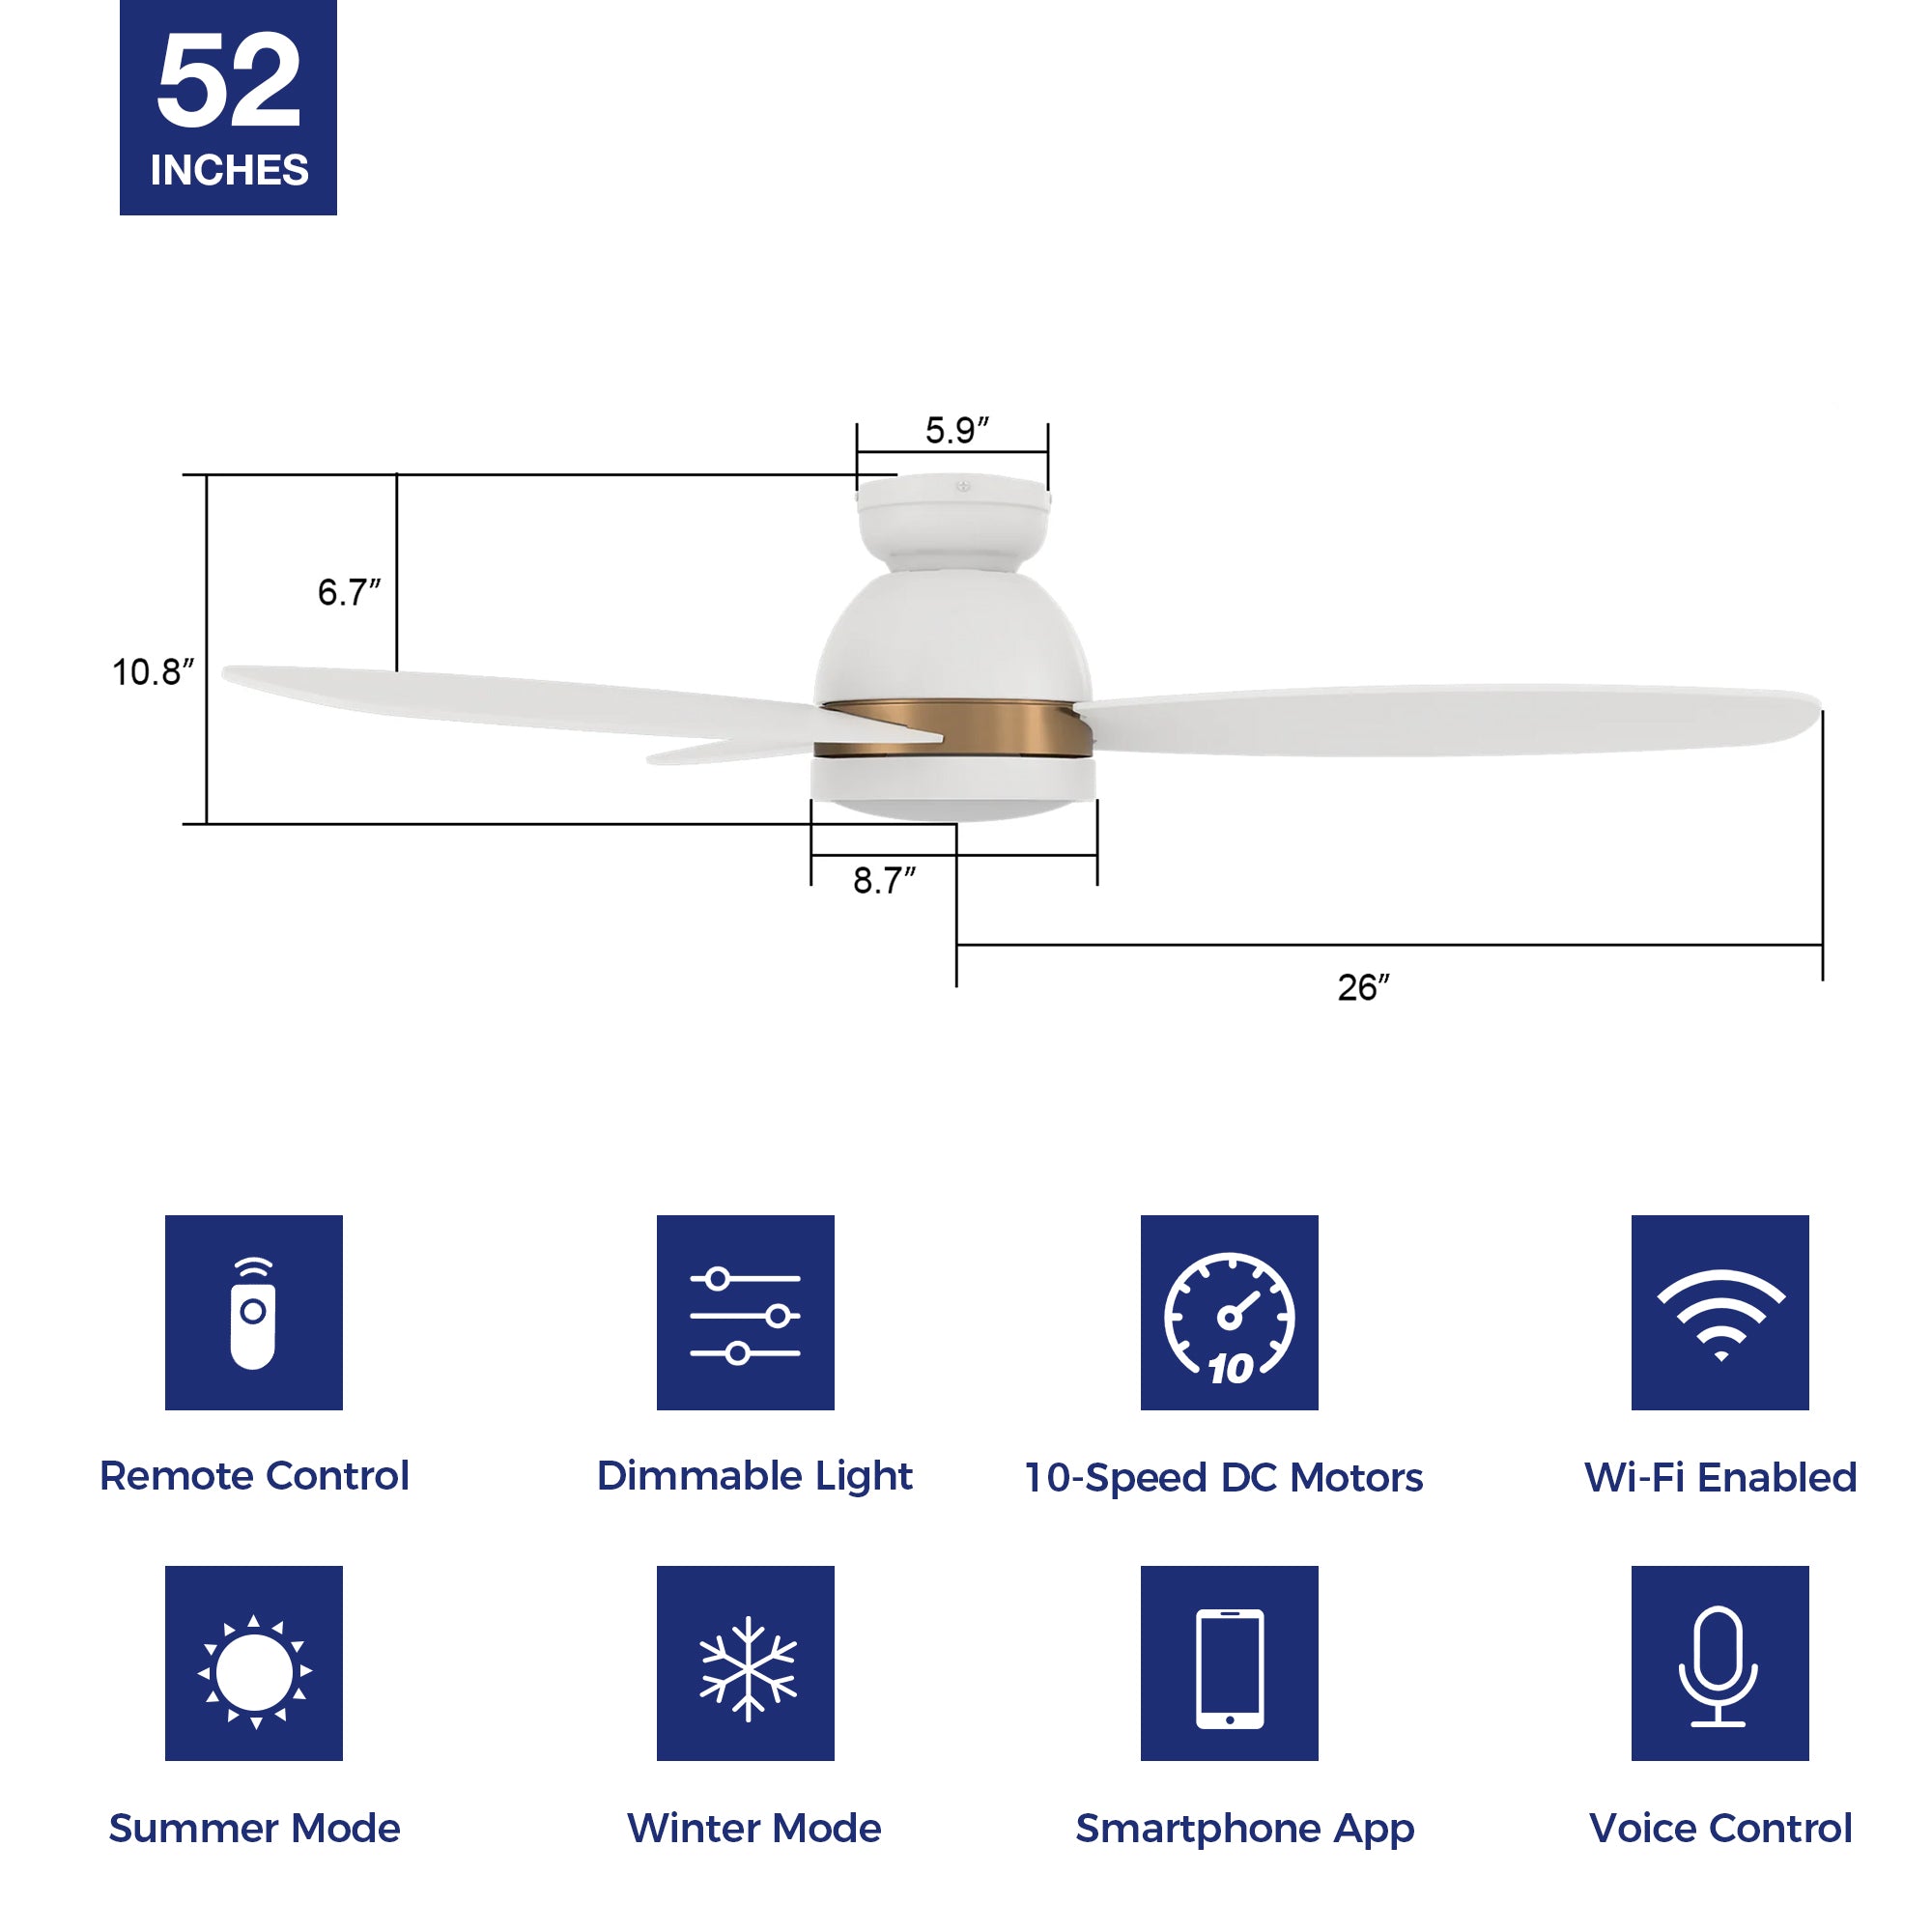 This Biscay 52&#39;&#39; smart ceiling fan keeps your space cool, bright, and stylish. It is a soft modern masterpiece perfect for your large indoor living spaces. This Wifi smart ceiling fan is a simplicity designing with White finish, use elegant Plywood blades and has an integrated 4000K LED daylight. The fan features Remote control, Wi-Fi apps, Siri Shortcut and Voice control technology (compatible with Amazon Alexa and Google Home Assistant ) to set fan preferences. 